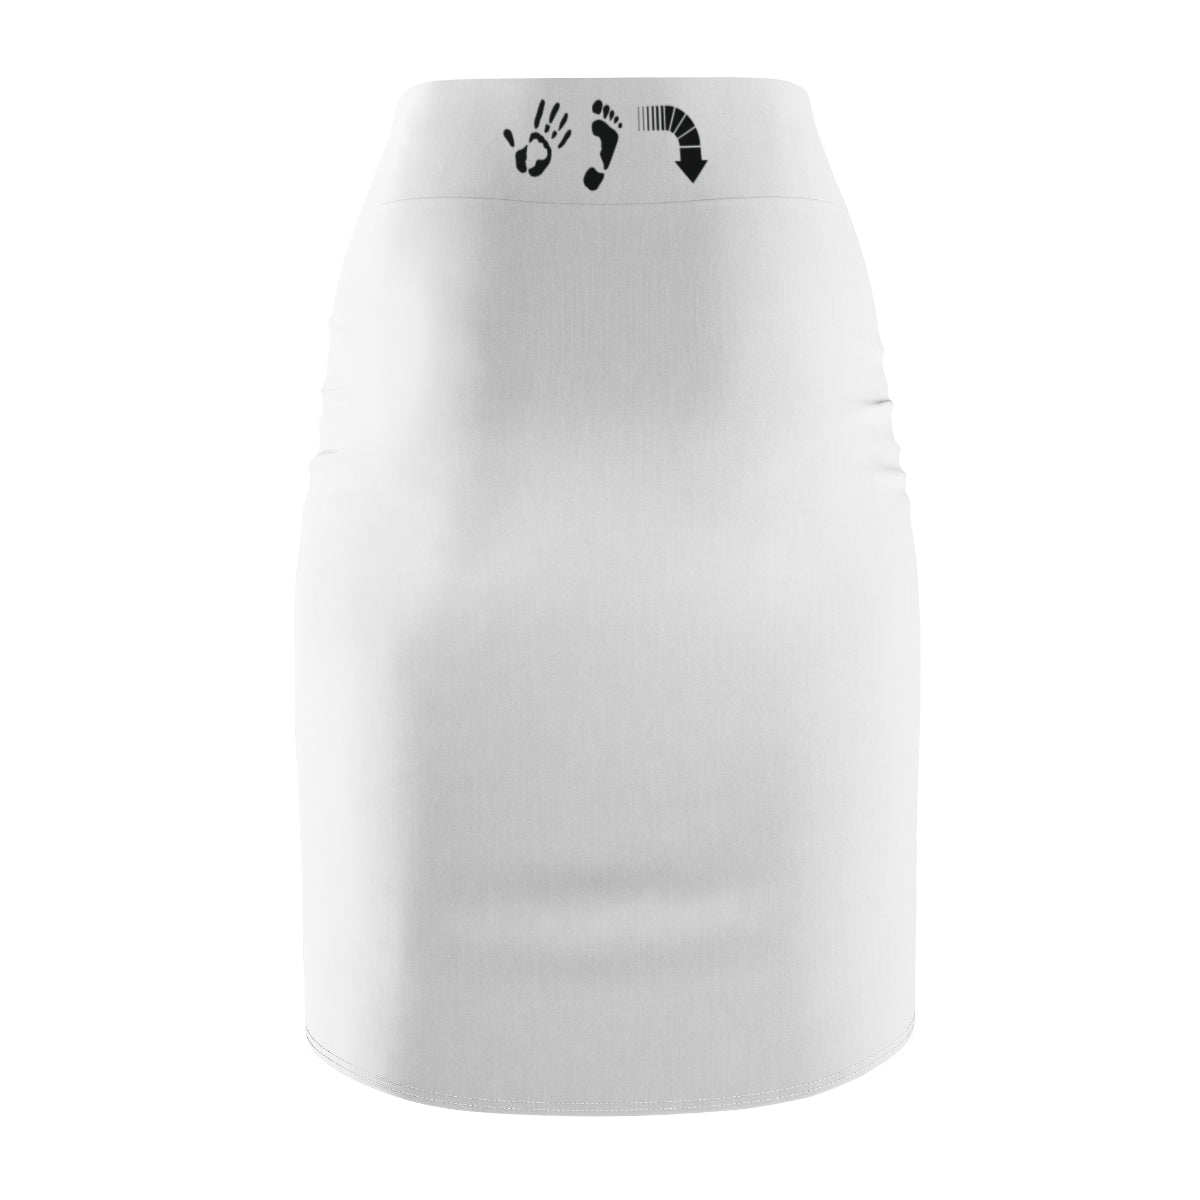 Five Toes Down SSS Women's Pencil Skirt